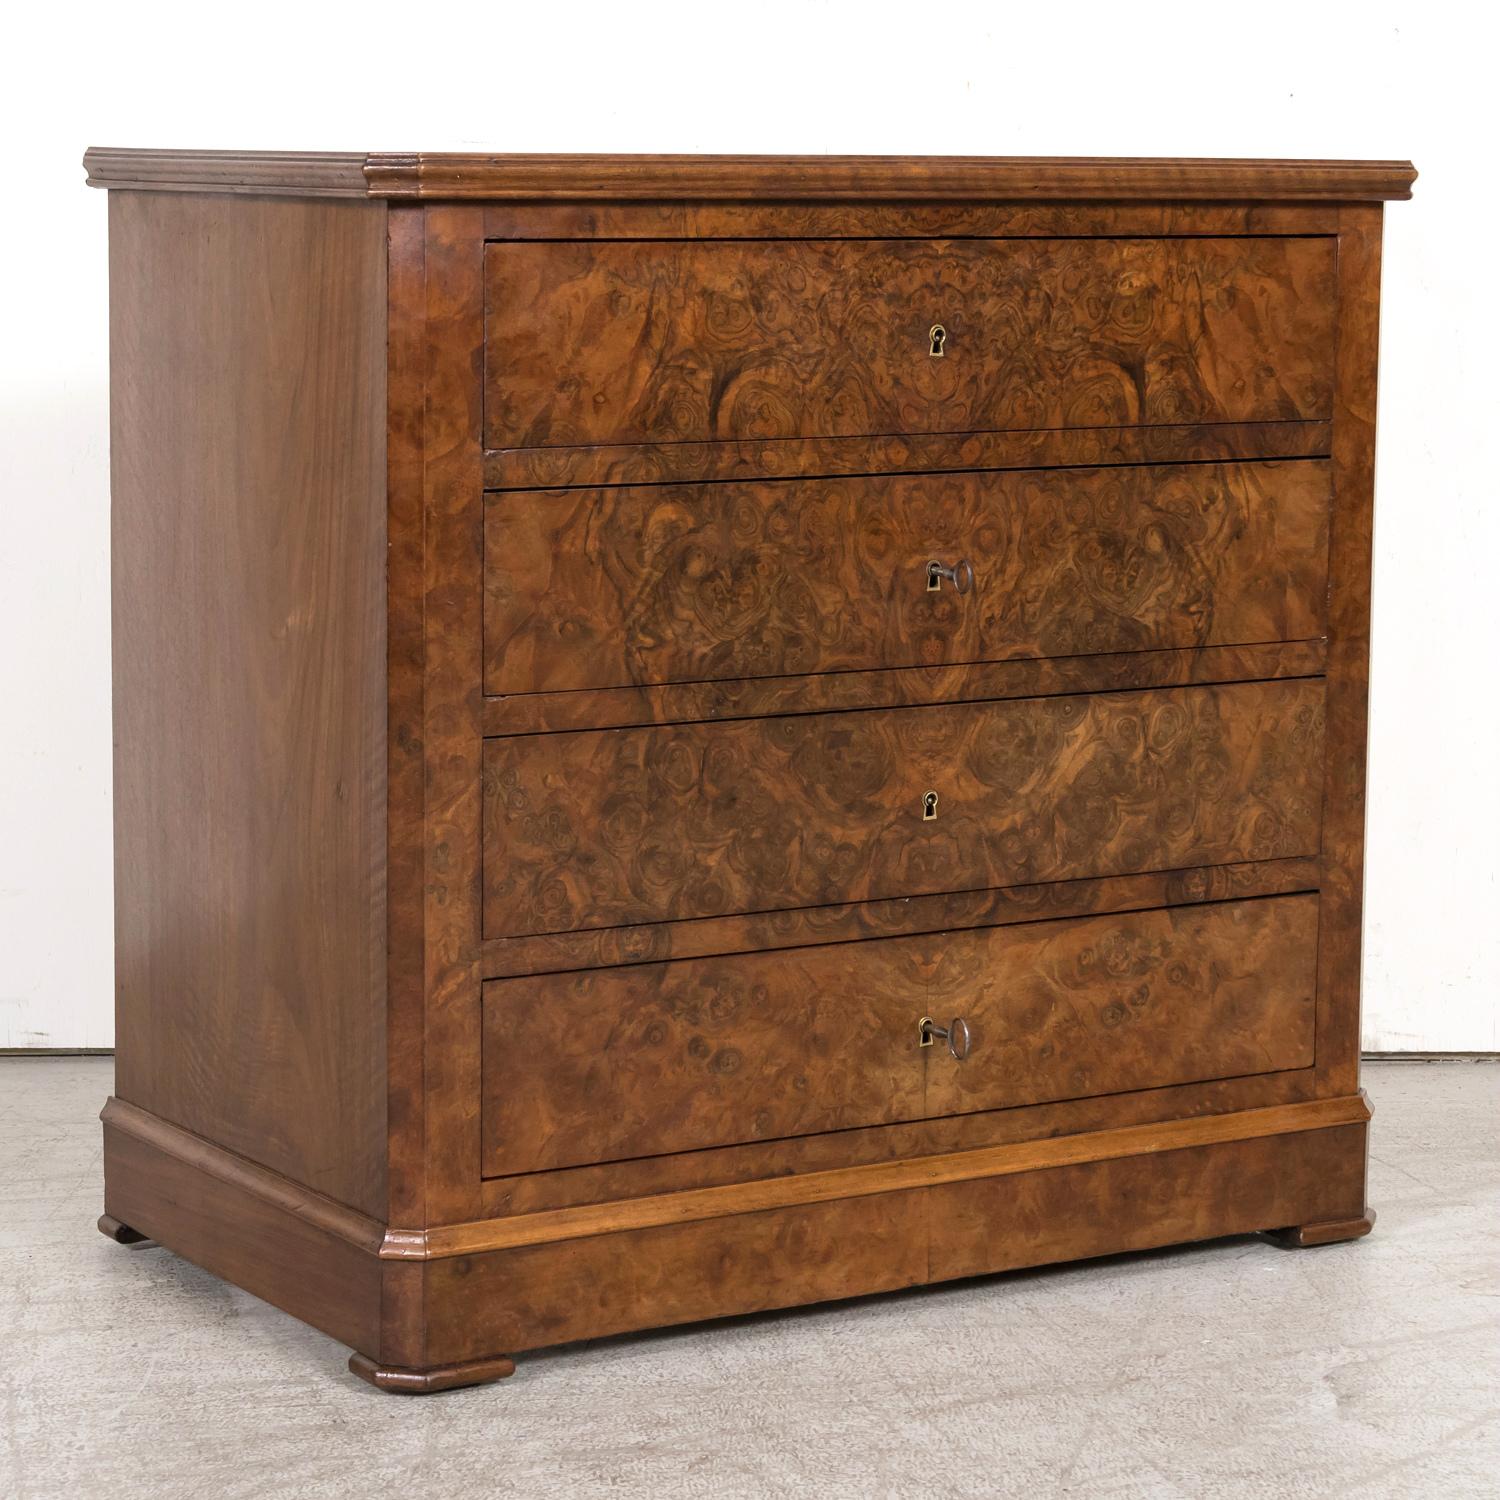 A fine 19th century French Louis Philippe period petite commode, circa 1850s, from Provence. Having an inset Carrara marble top, this handsome walnut antique French chest of drawers features a meticulously bookmatched burled walnut front with 4 full